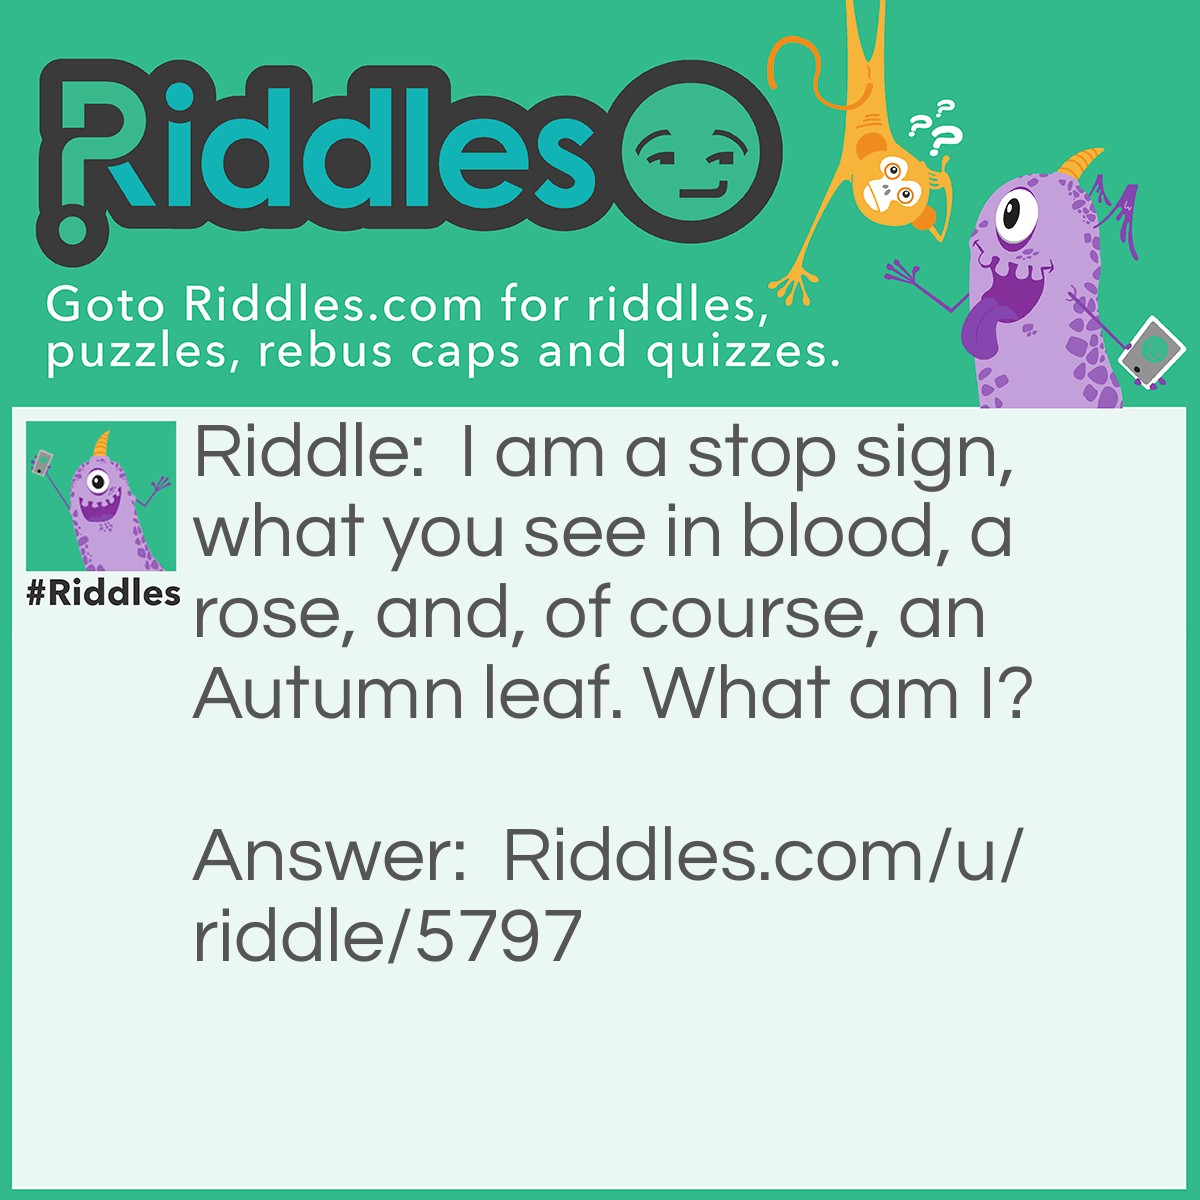 Riddle: I am a stop sign, what you see in blood, a rose, and, of course, an Autumn leaf. What am I? Answer: The color red.